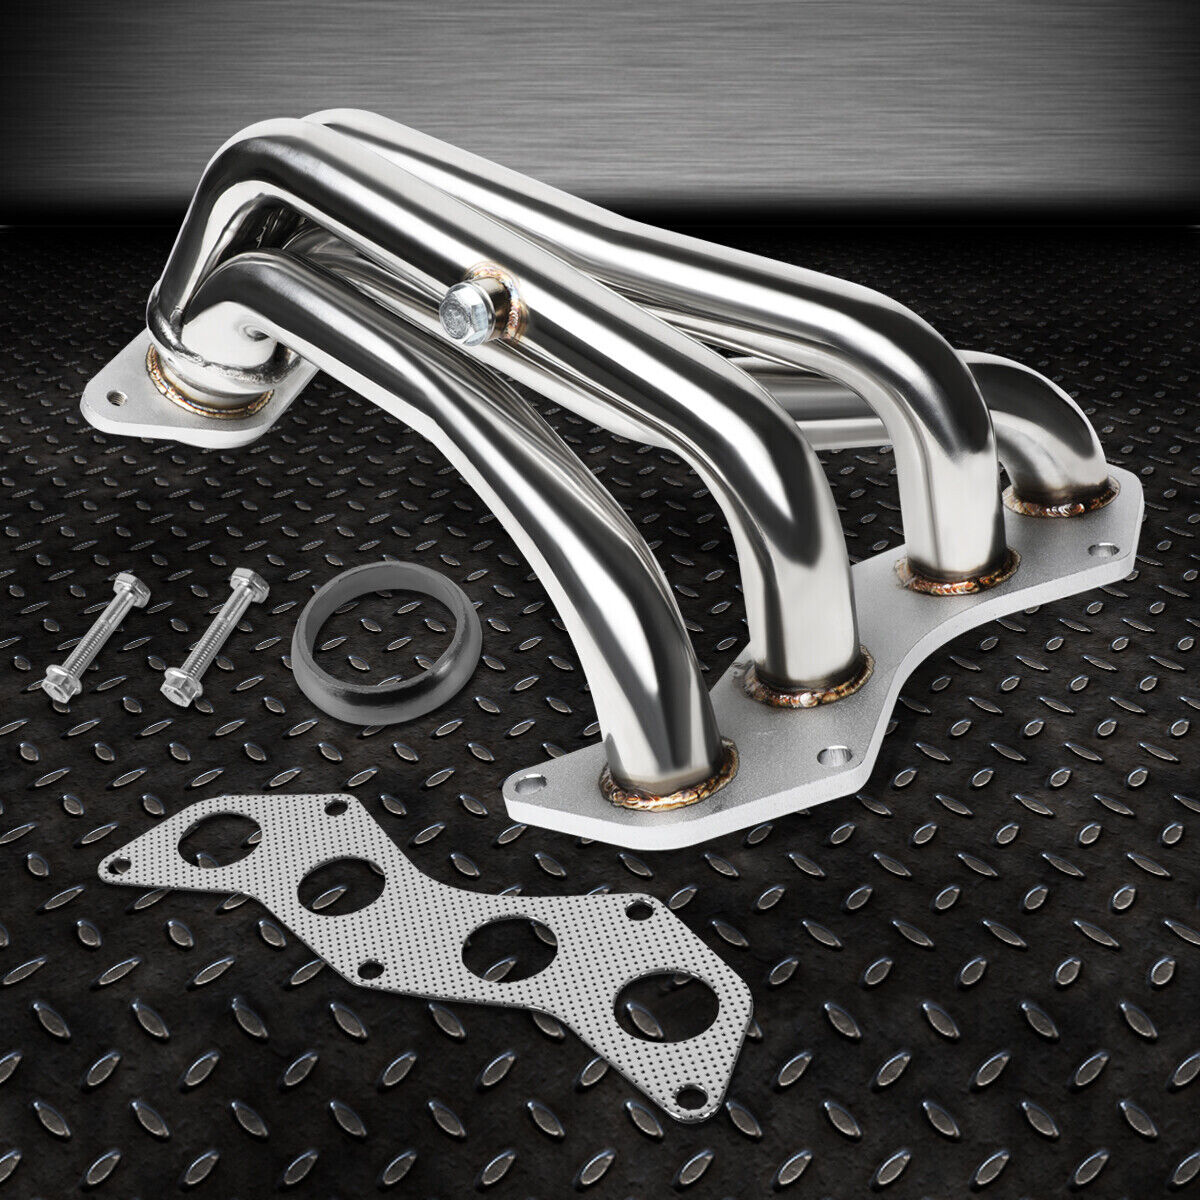 For 08-15 Scion Xb 2.4L/4Cyl Pair Of Stainless Steel Exhaust Manifold Header